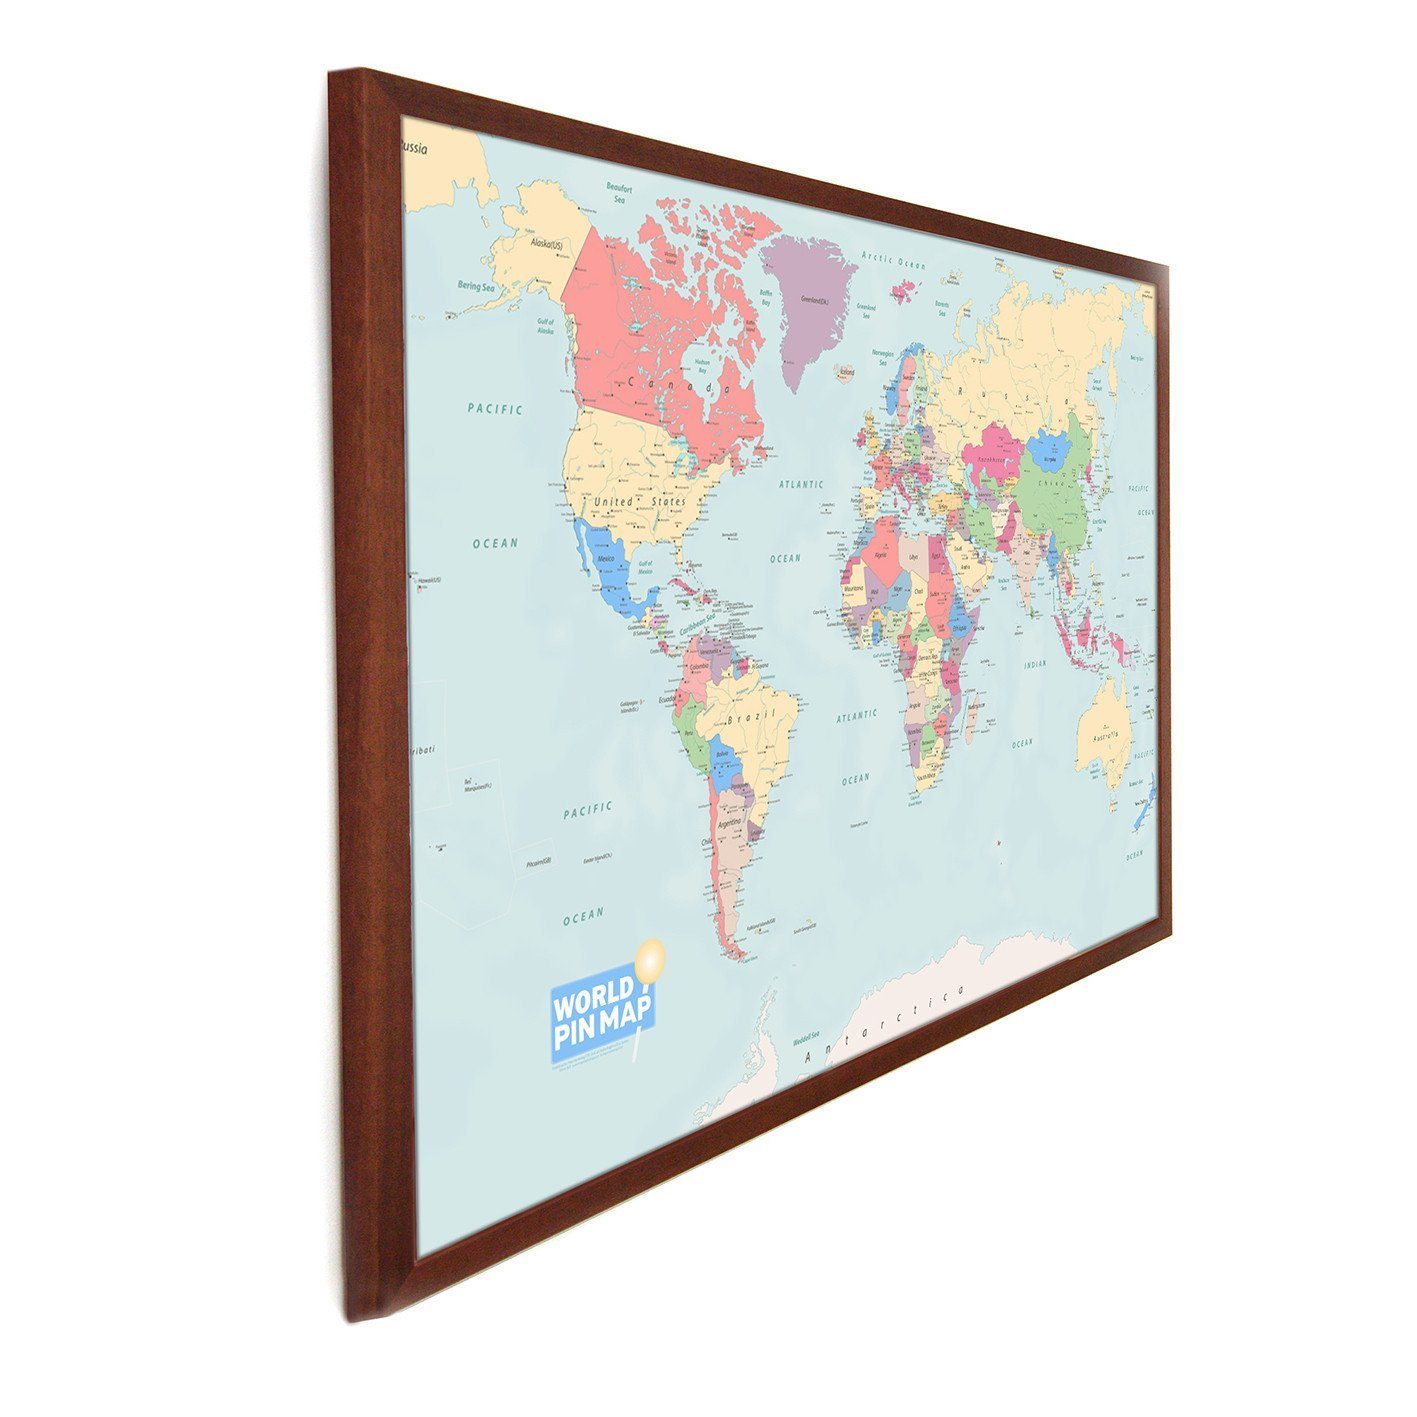 Map Gift - Framed World Map Pinboard